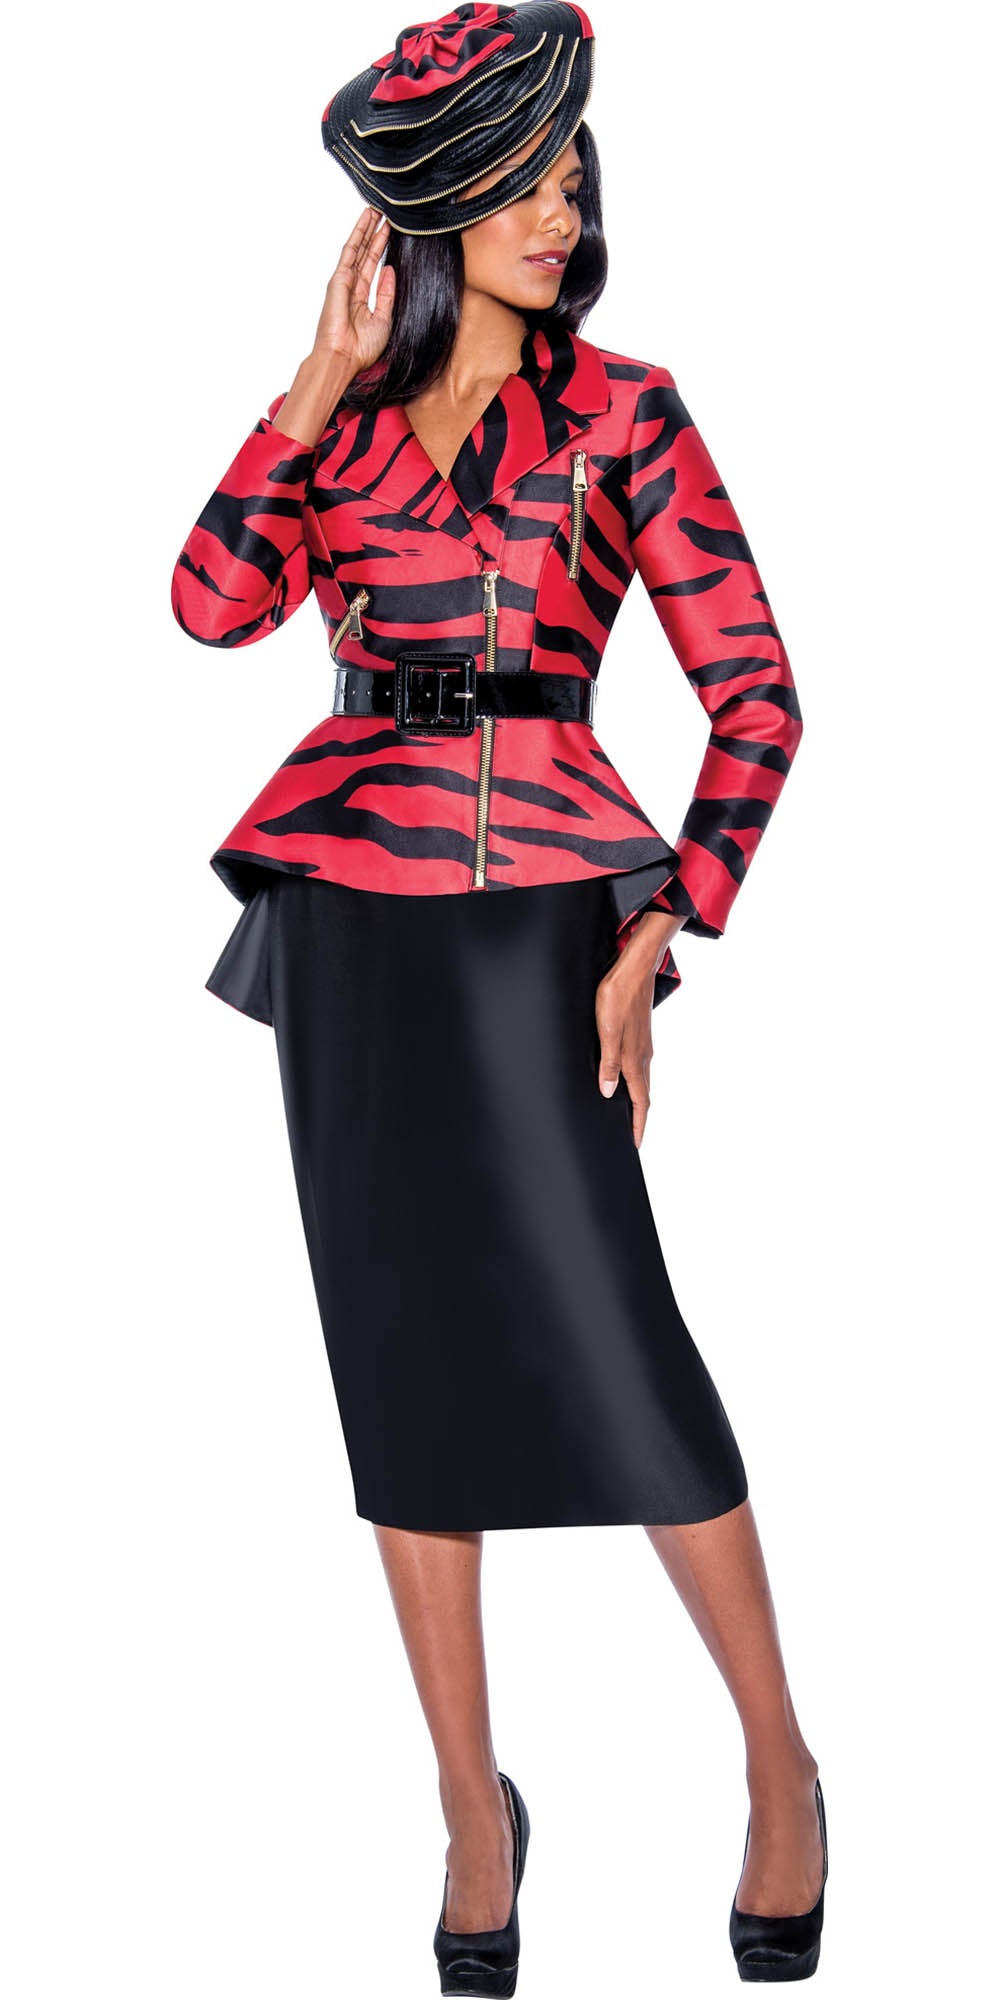 GMI G9242 - Red Black 2PC High-Low Animal Print Skirt Suit with Belt